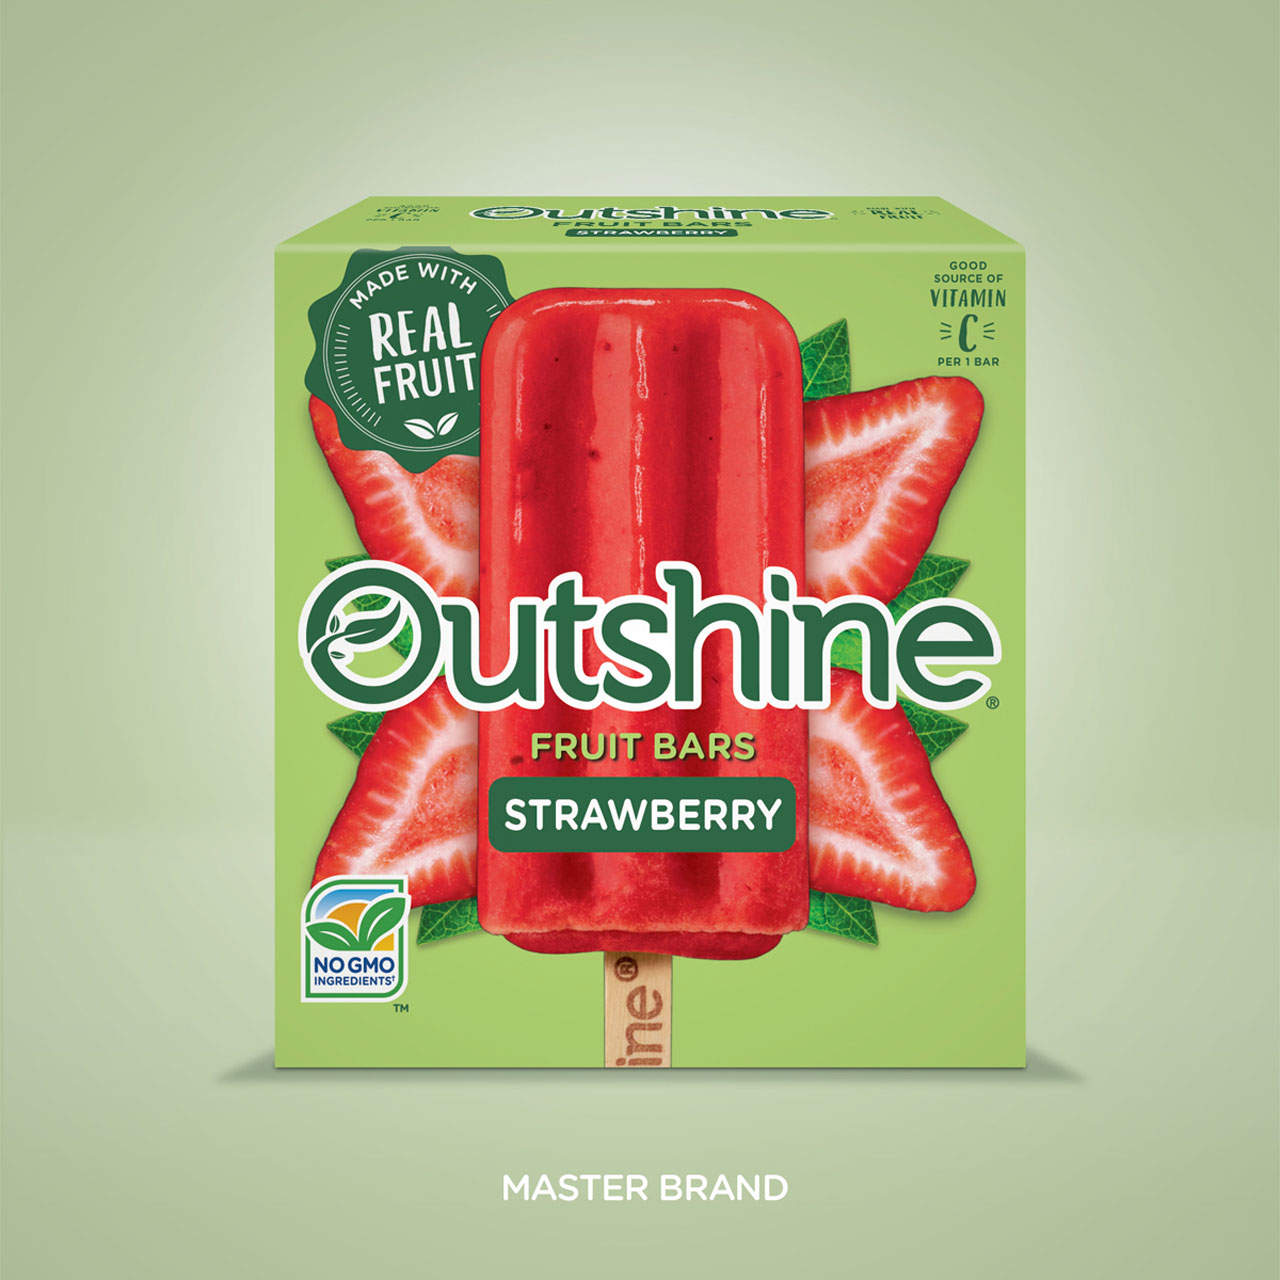 Outshine Innovations